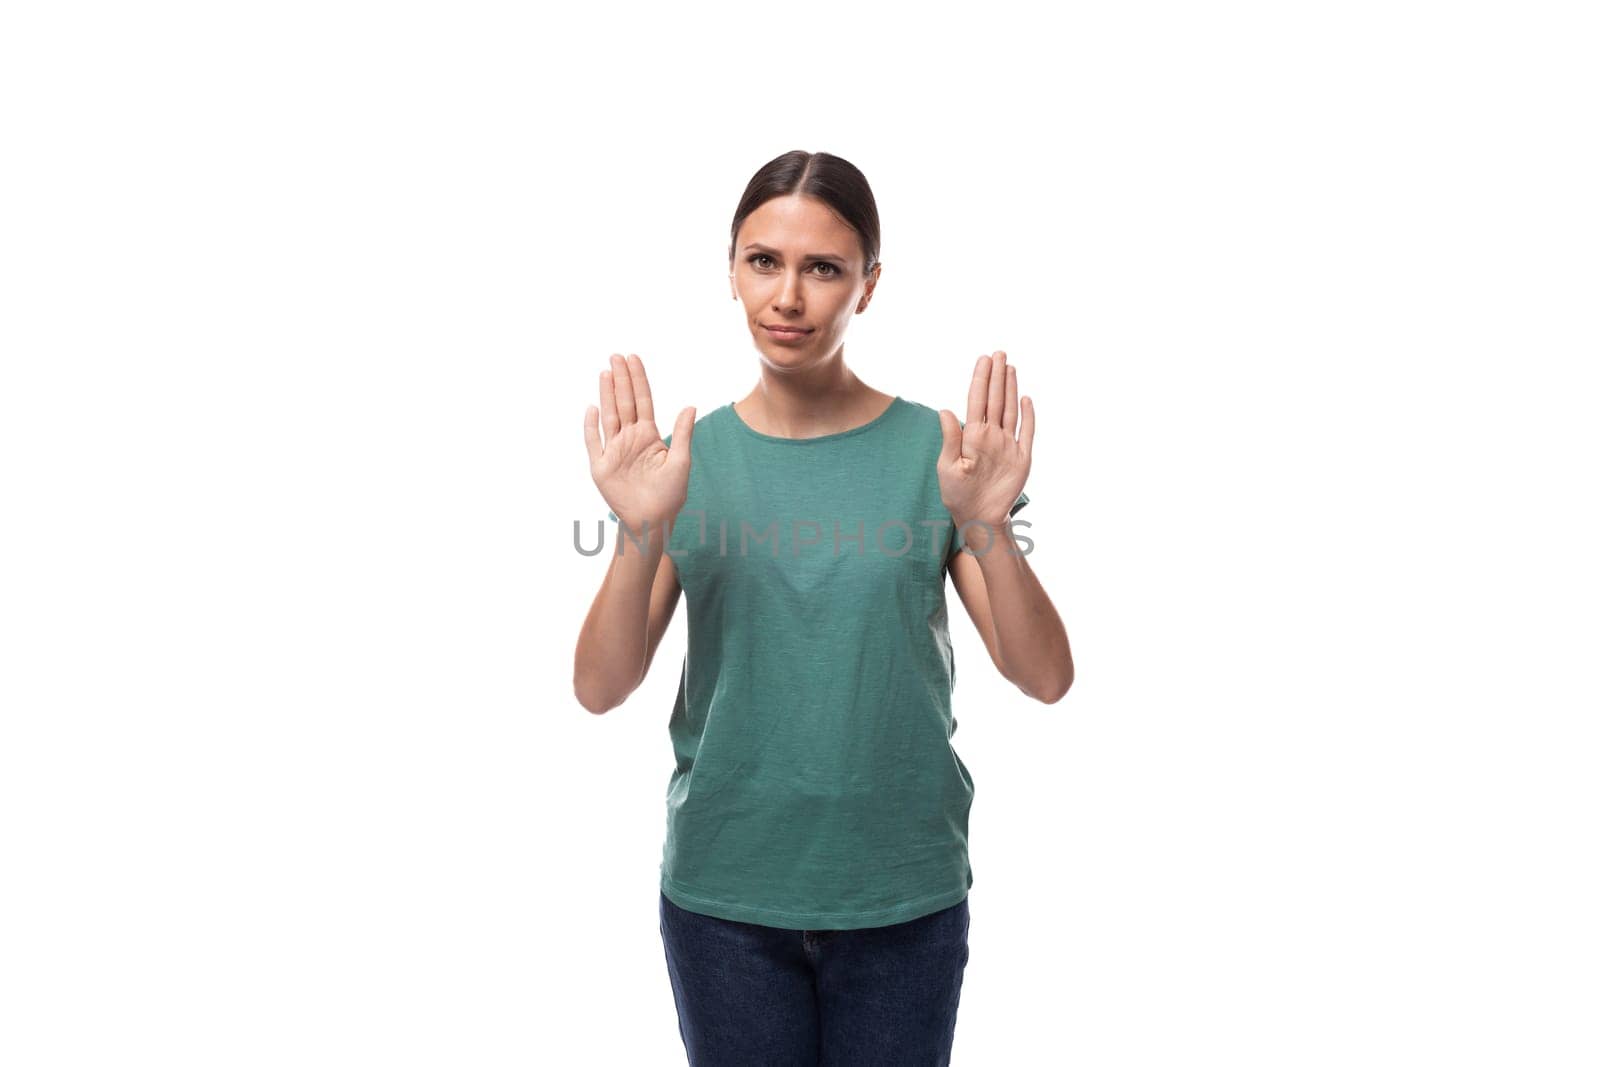 A 30 year old slender European brunette woman with a ponytail dressed in a green t-shirt and jeans is trying to remain calm.